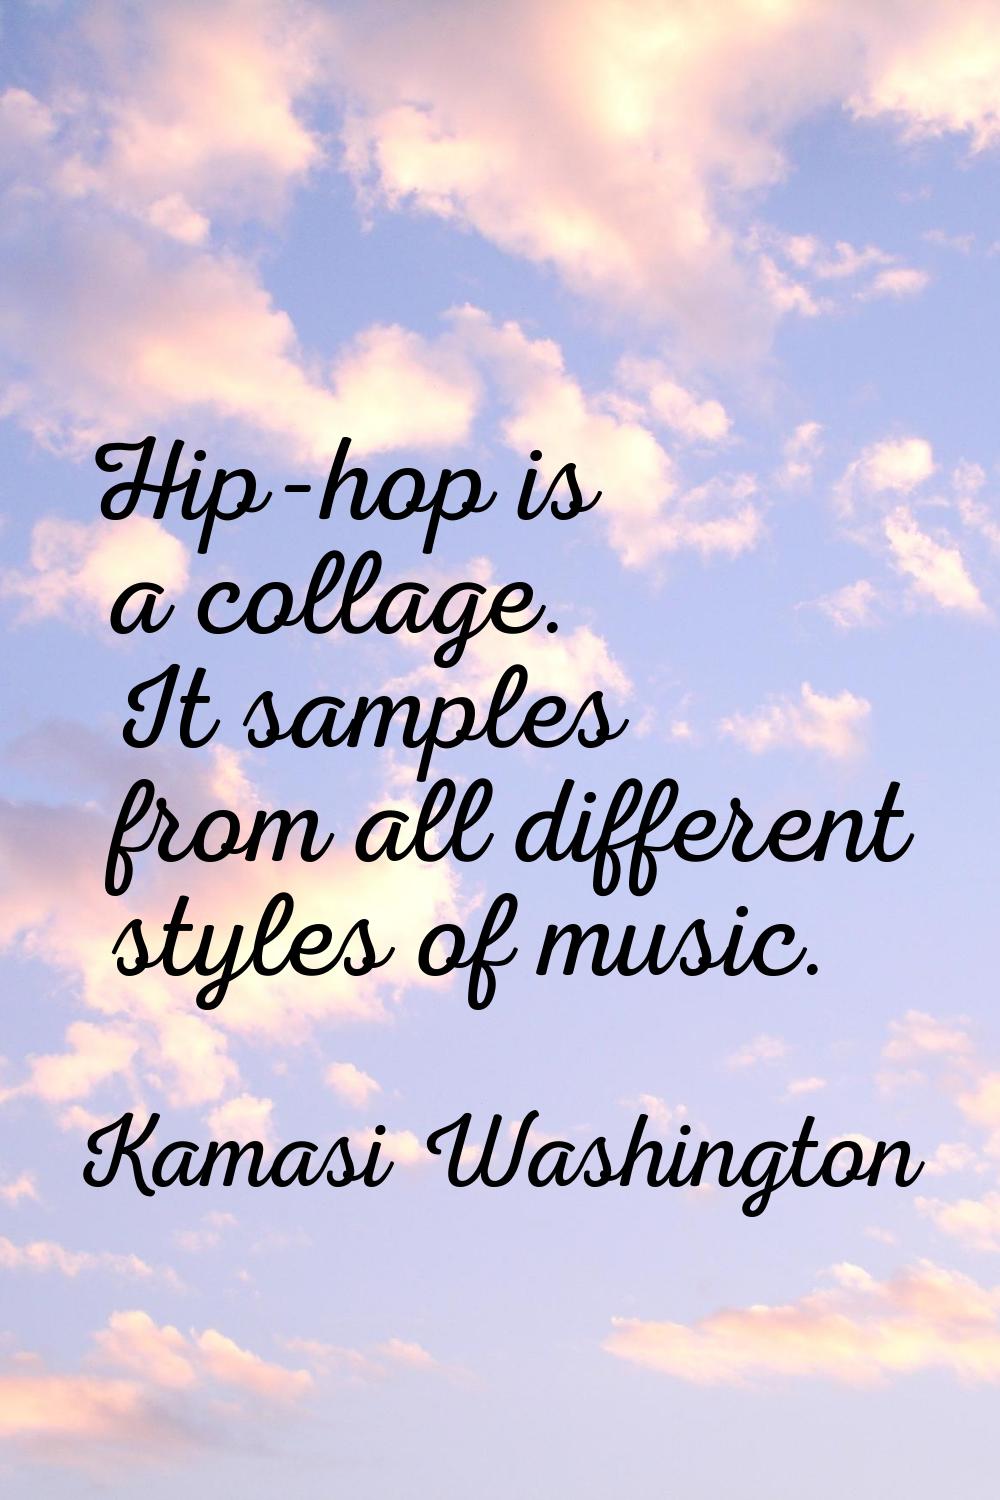 Hip-hop is a collage. It samples from all different styles of music.